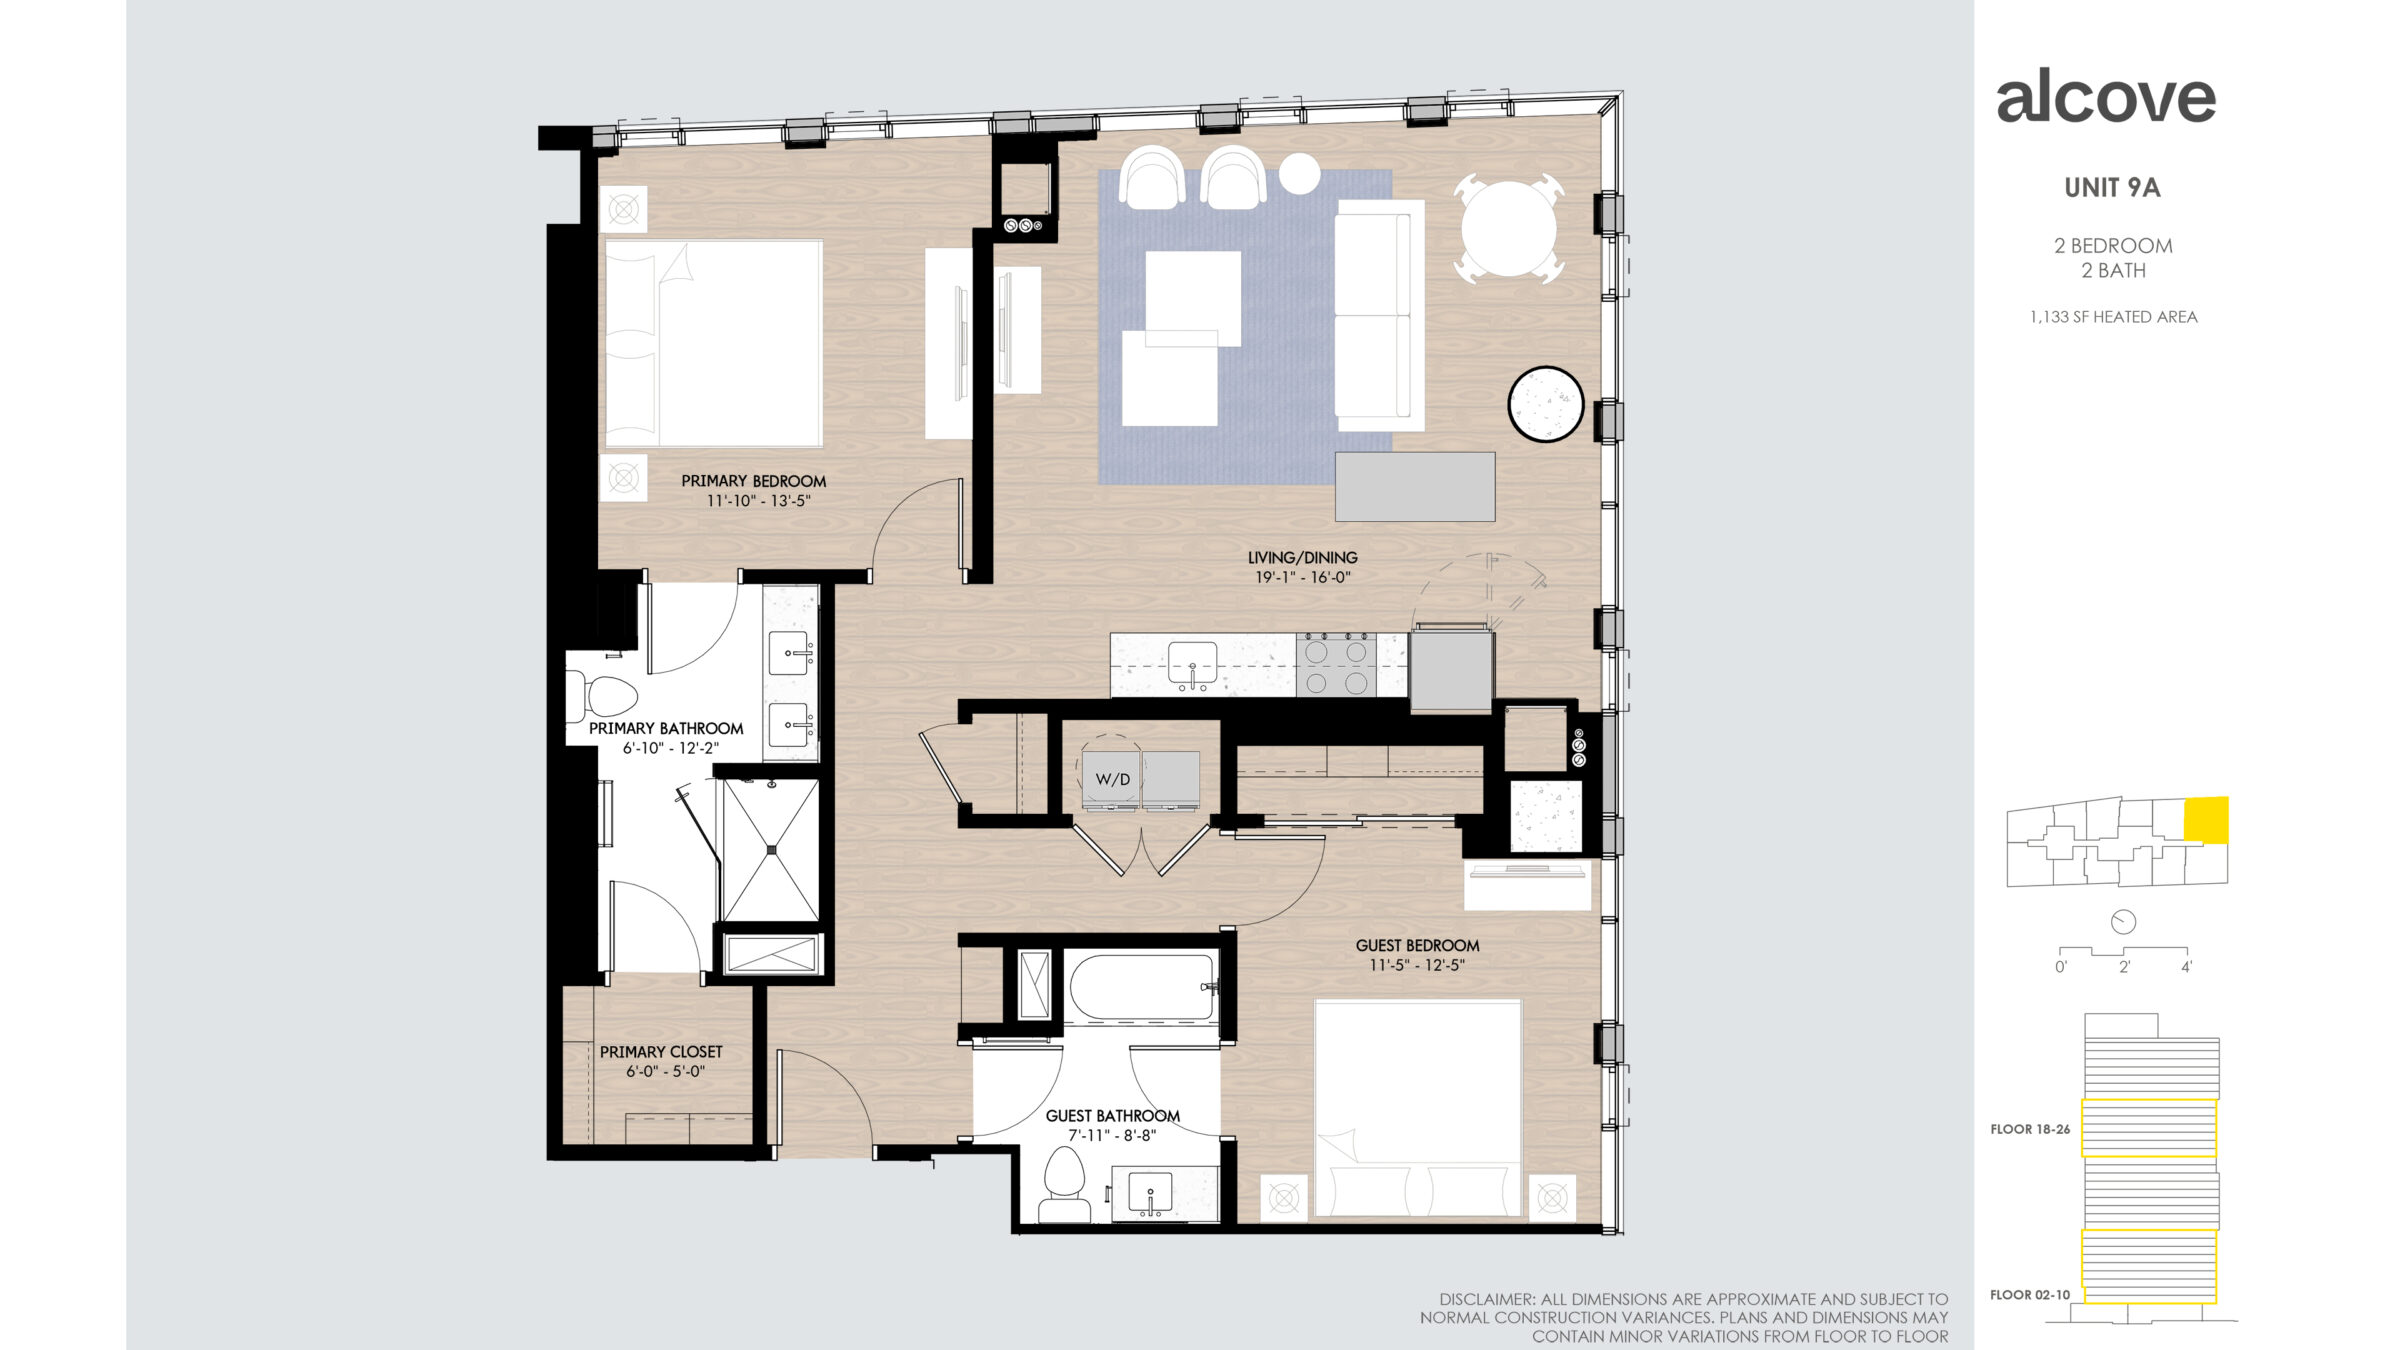 UNIT 9A 2 BEDROOM 2 BATH 1,133 SF HEATED AREA Floor 18-26 Floor 02-10 Disclaimer: all dimensions are approximate and subject to normal construction variances. Plans and dimensions may contain minor variations from floor to floor. 